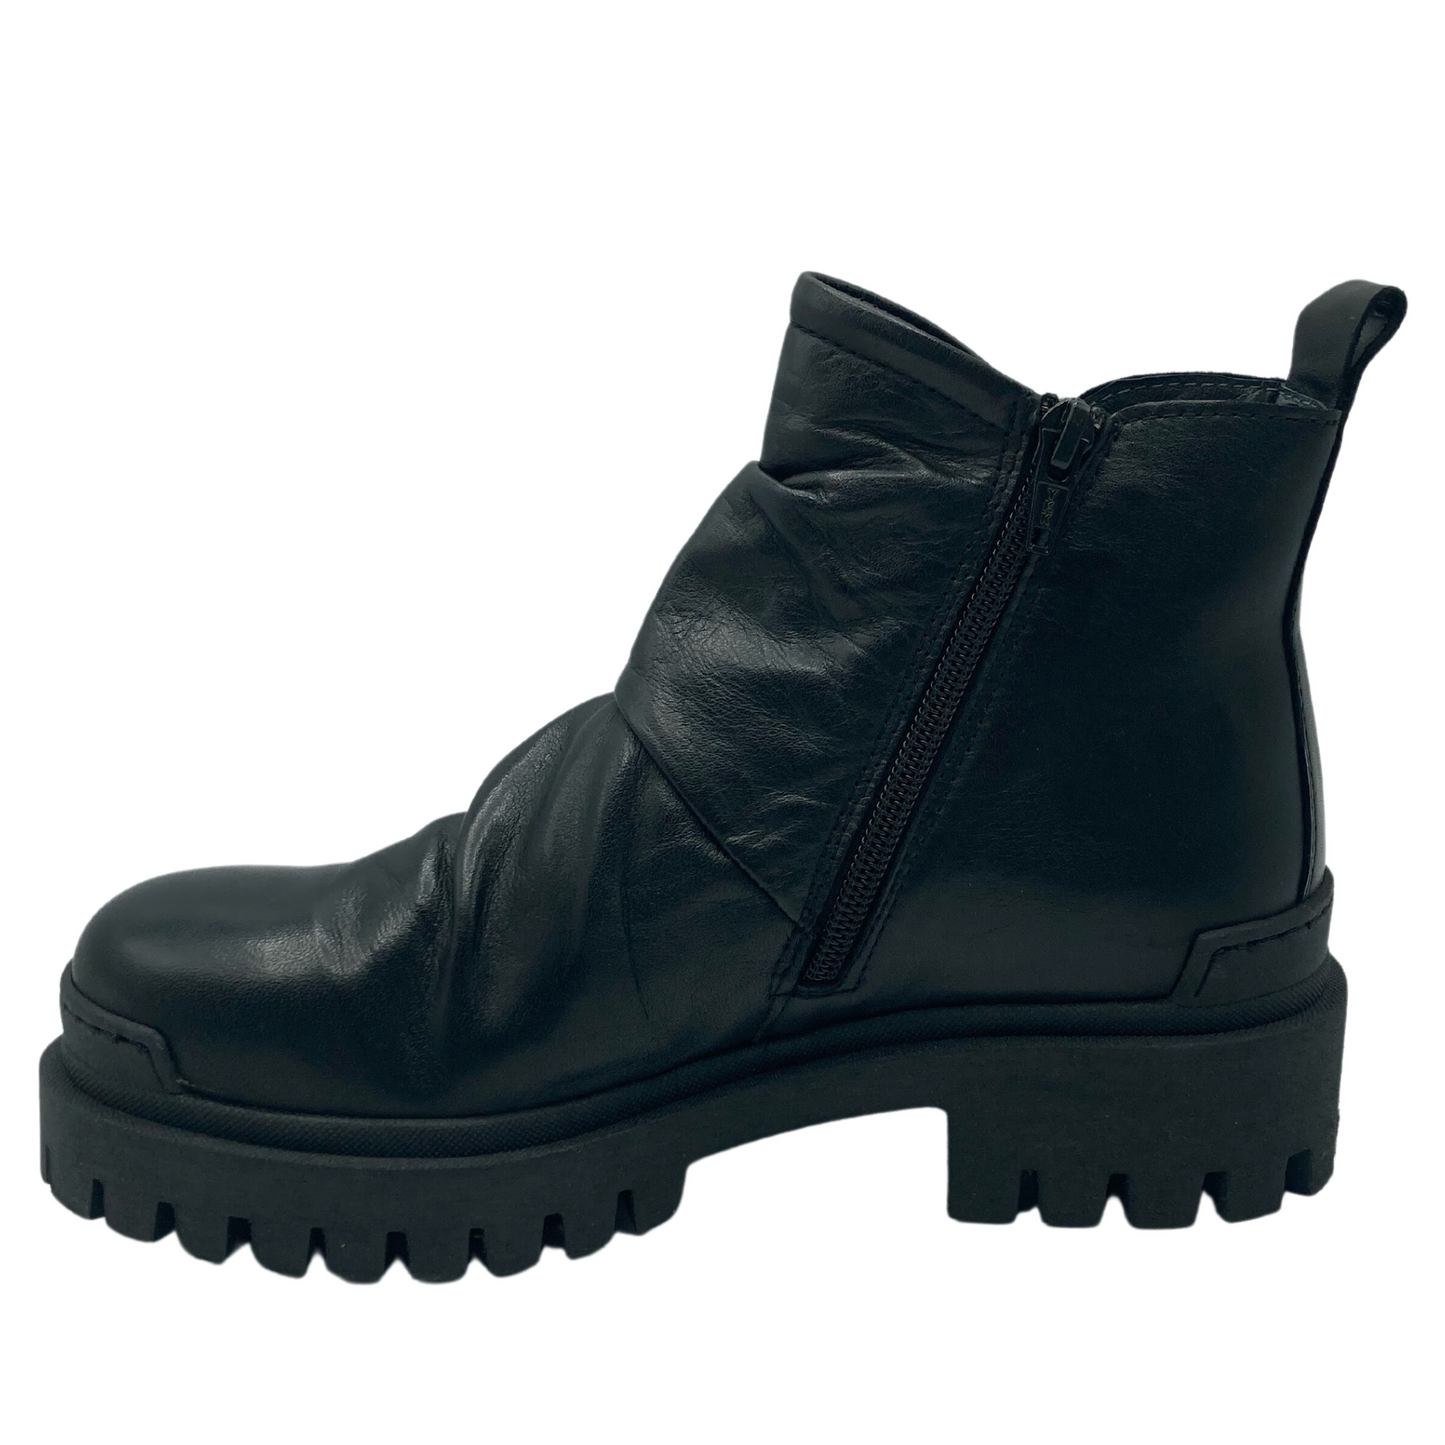 Left facing view of black leather short boot with heel pull tab and side zipper entry